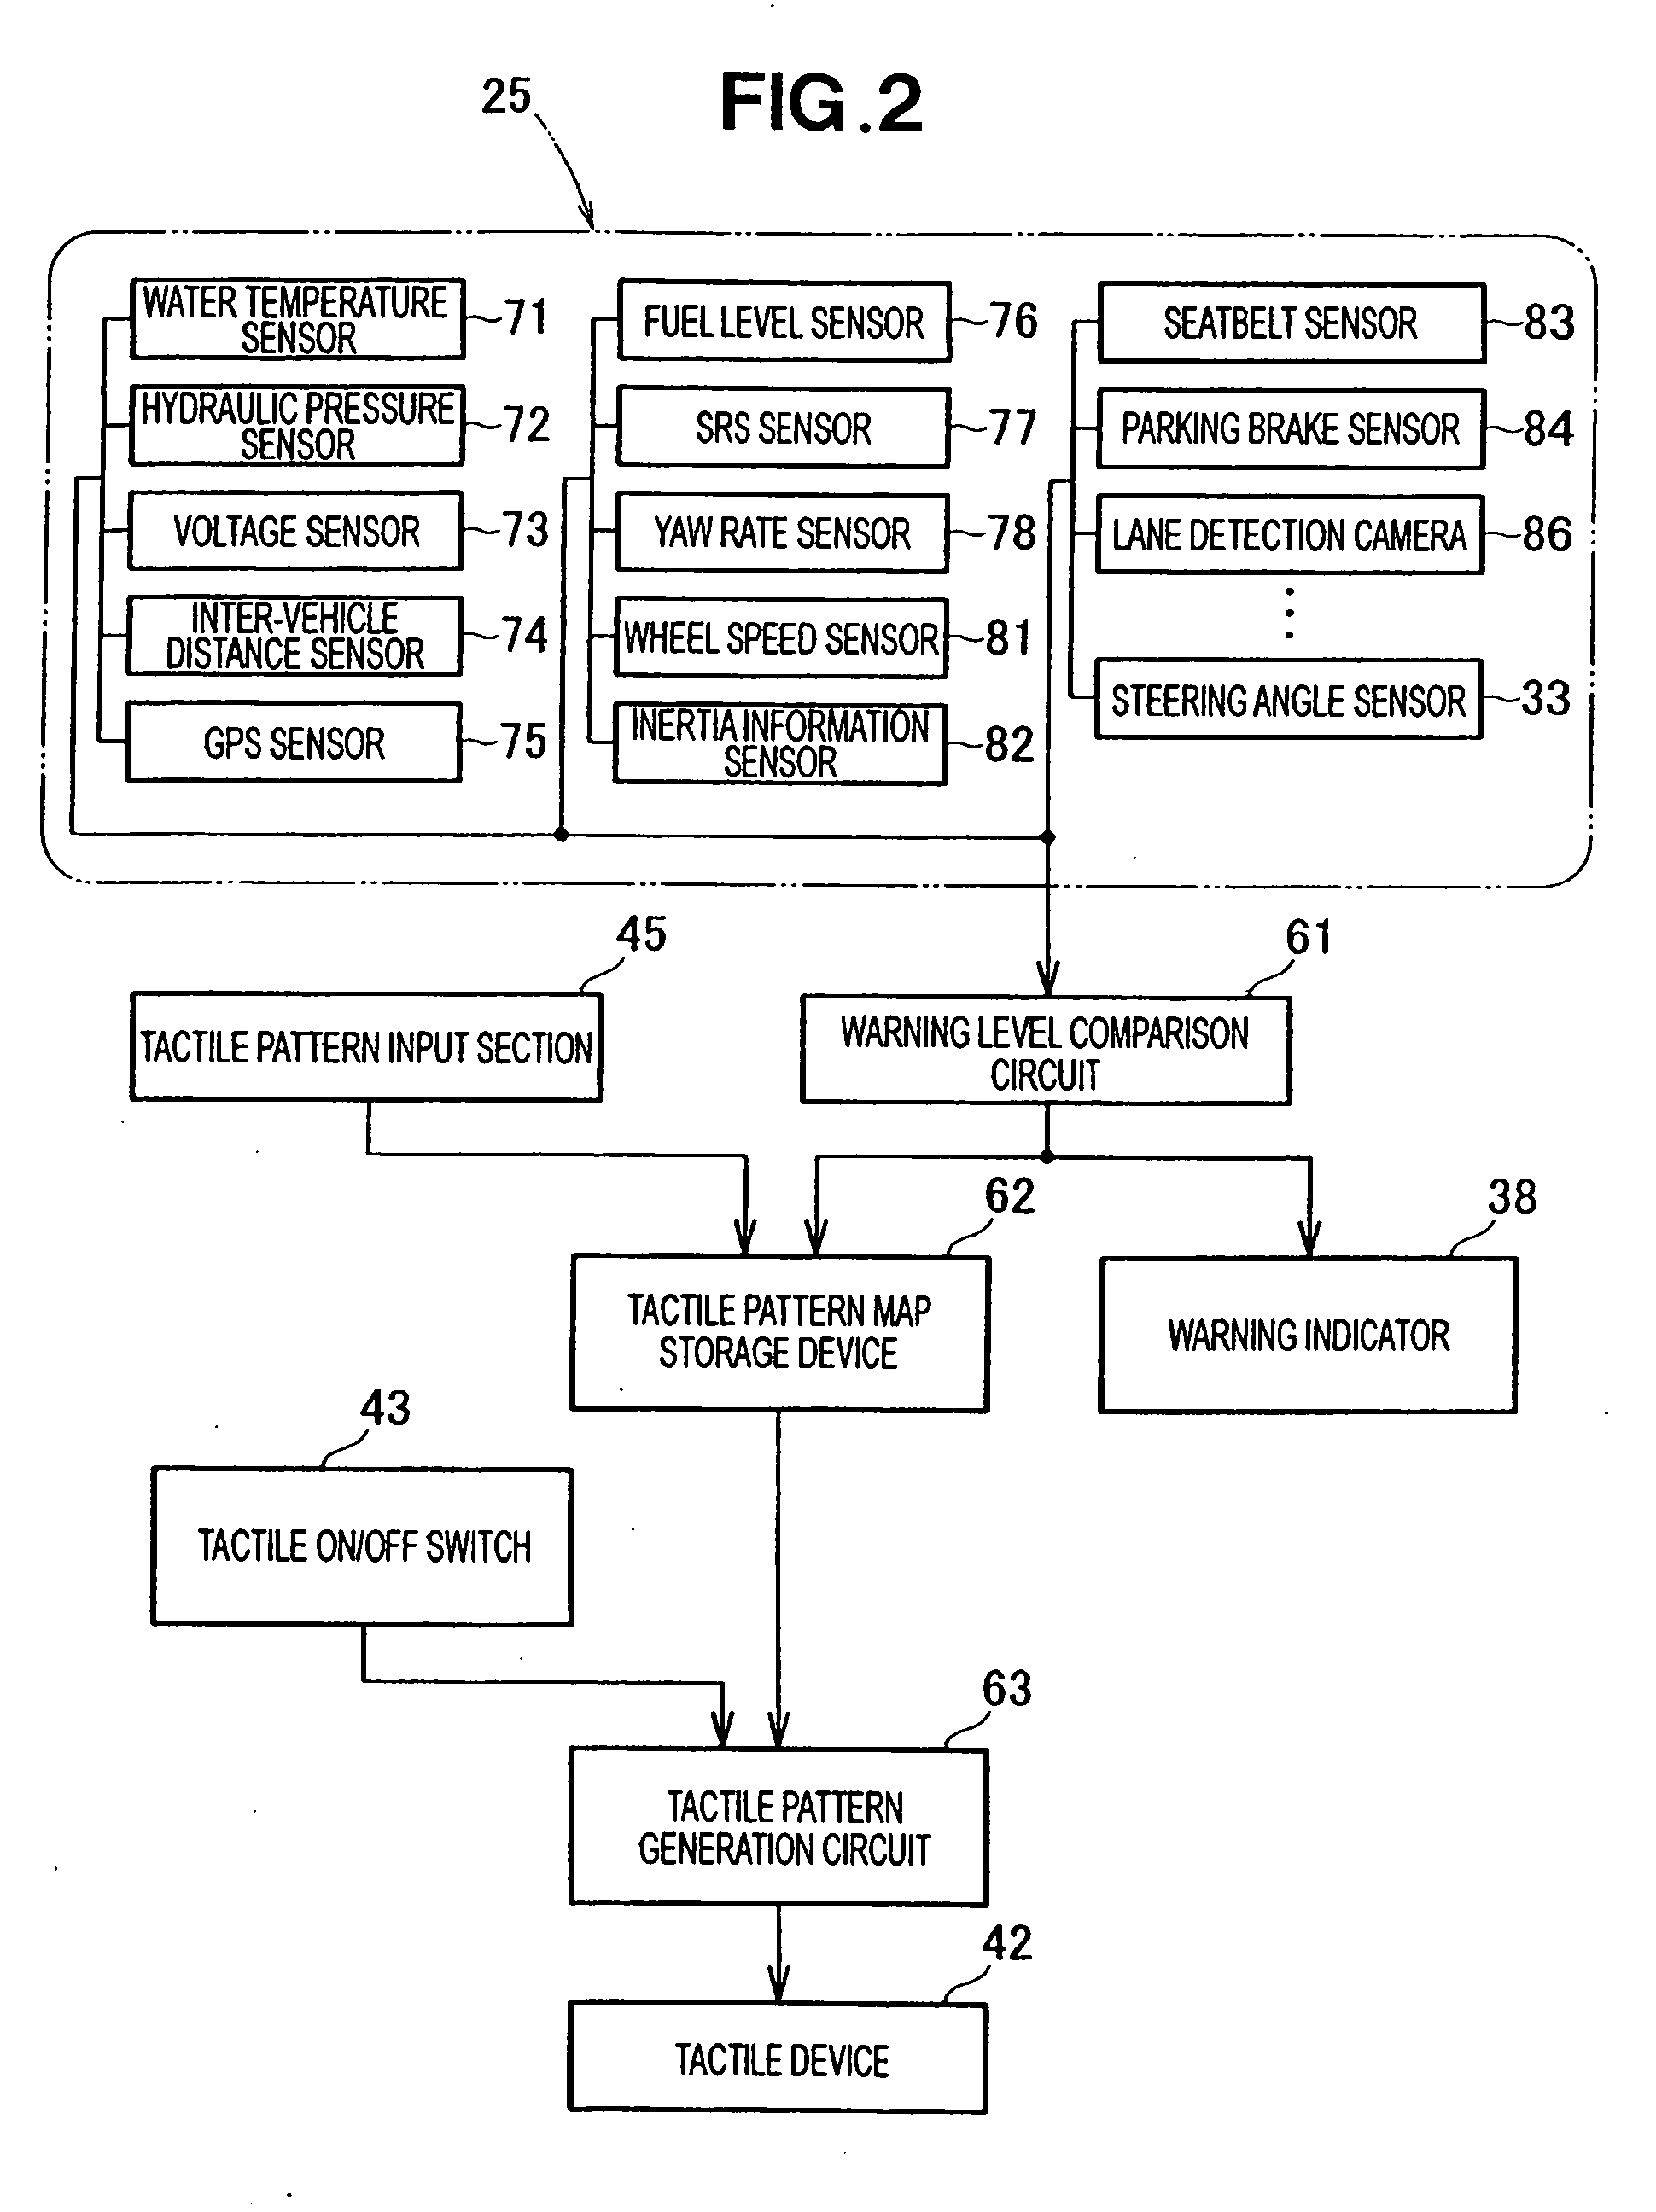 Vehicle state information transmission apparatus using tactile device